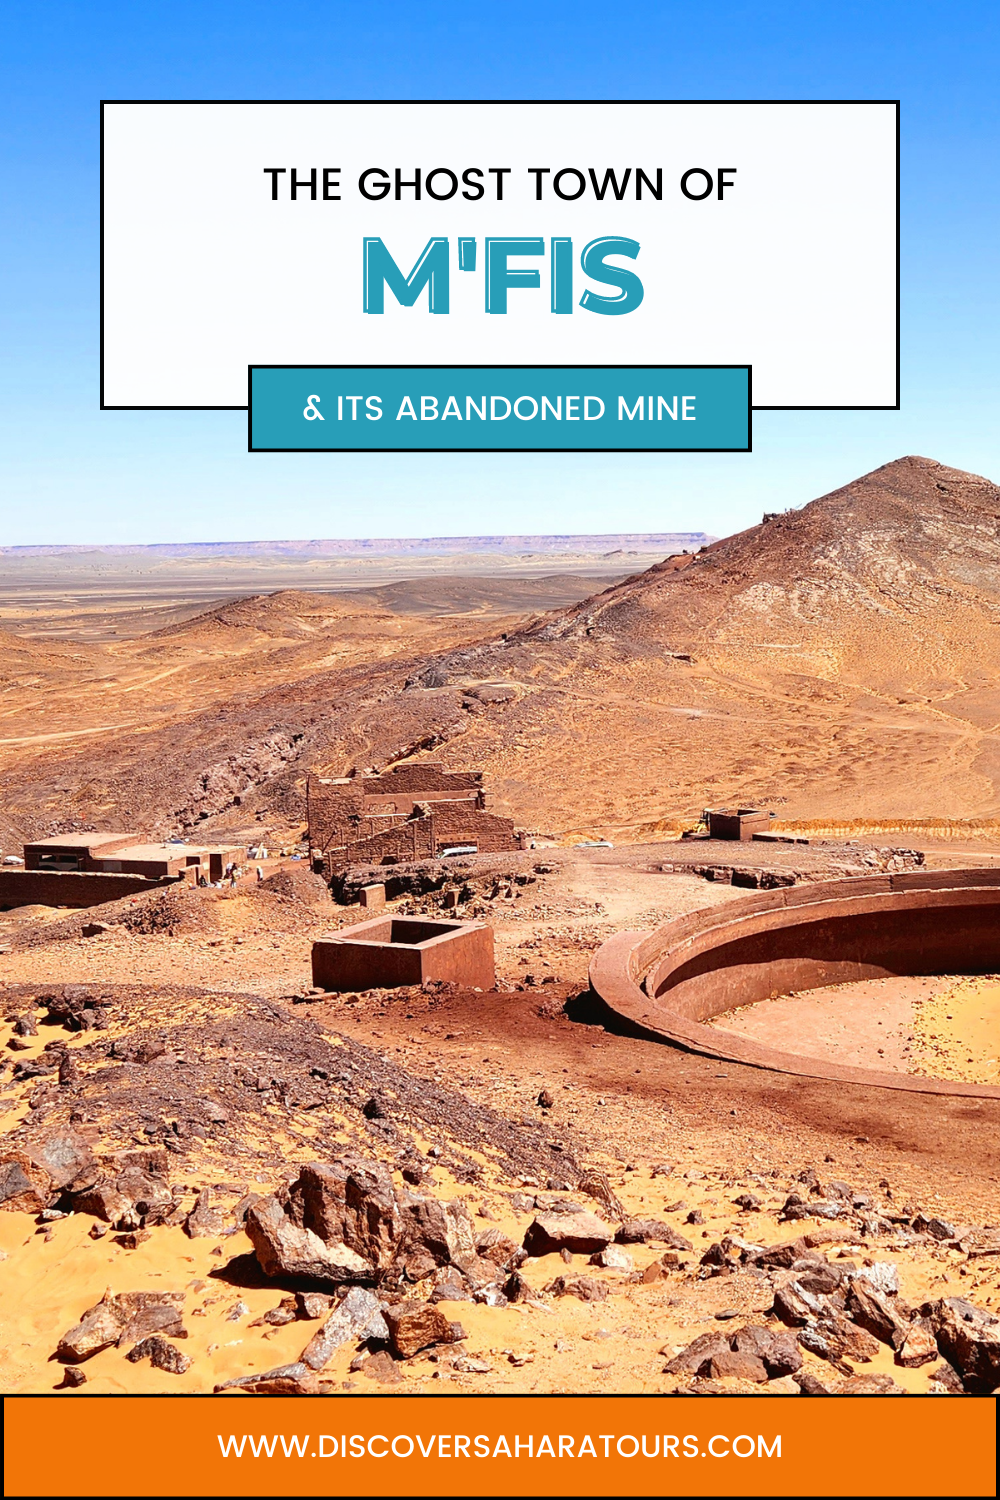 Mfis - A Ghost Town and Abandoned Mine in the Sahara